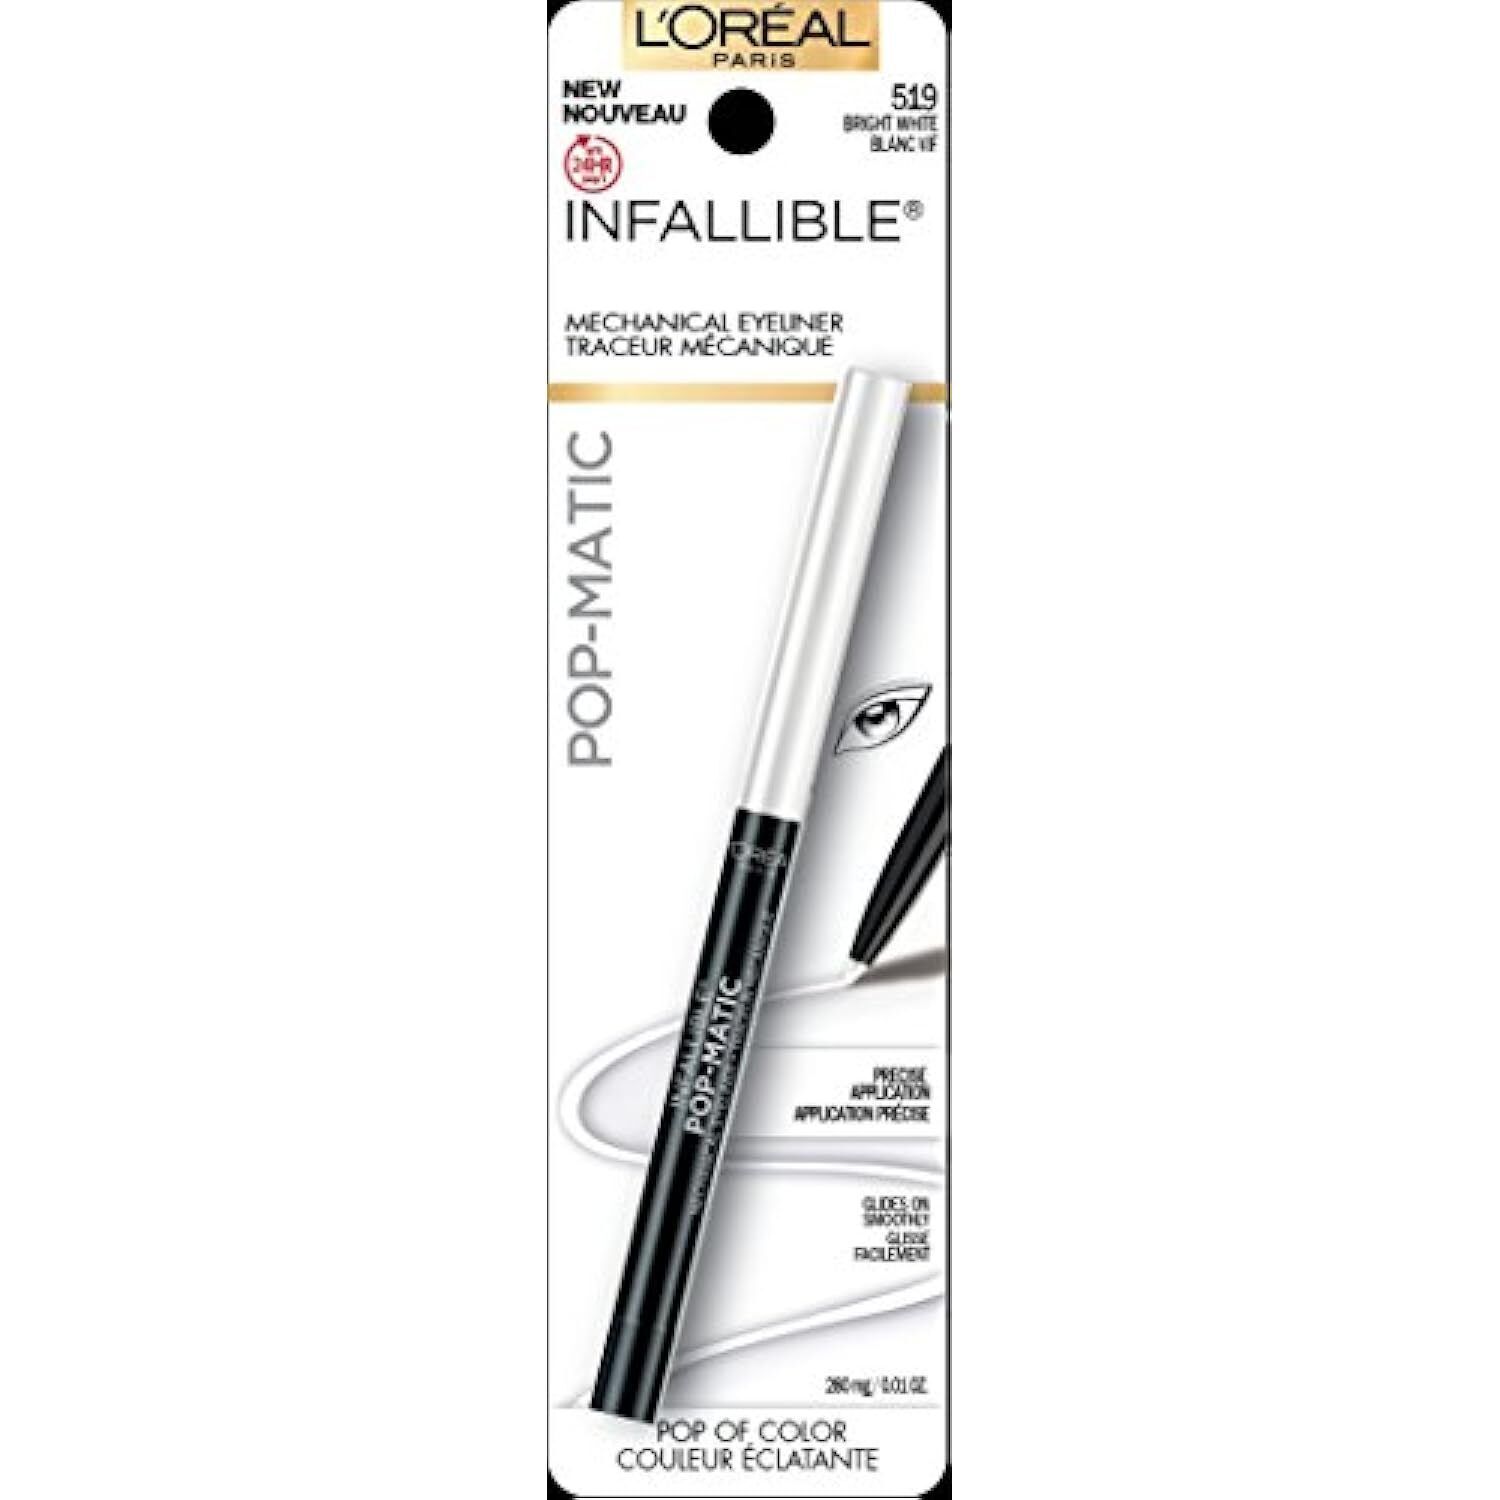 Primary image for L'Oreal Paris Infallible Pop-Matic Eyeliner: White